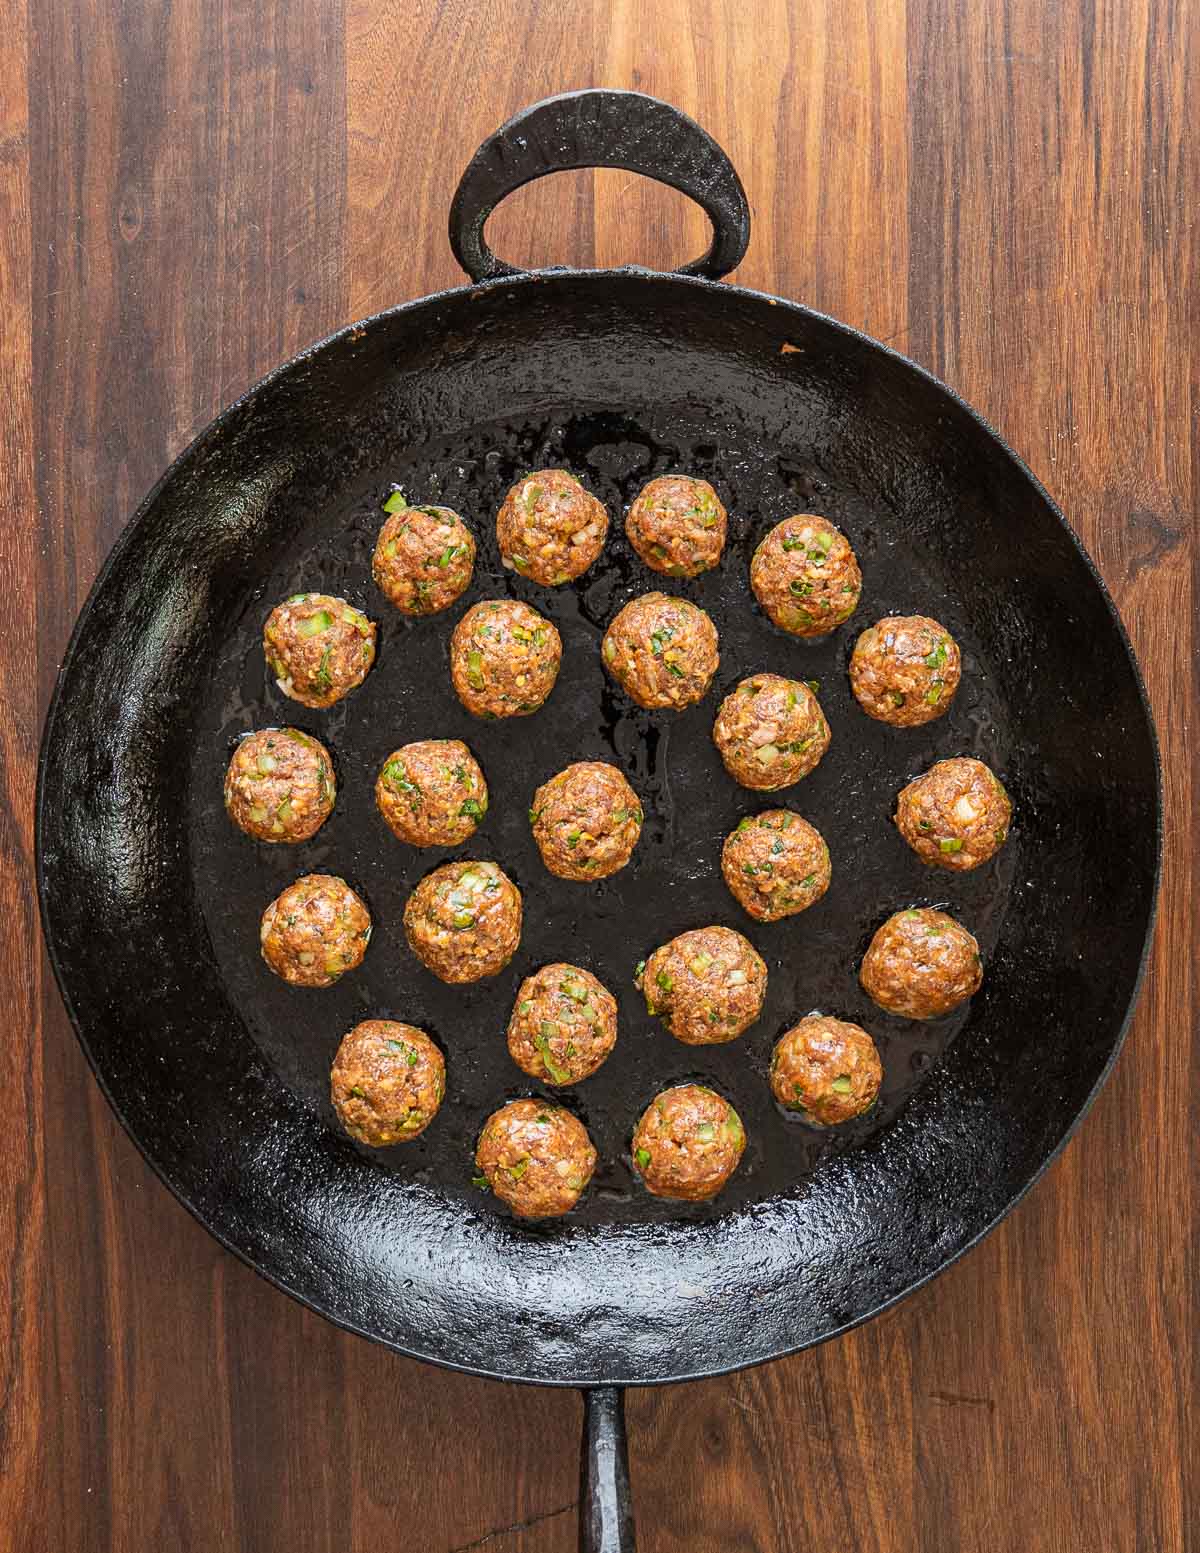 A pan of raw meatballs ready to cook in a Kehoe carbon steel pan.